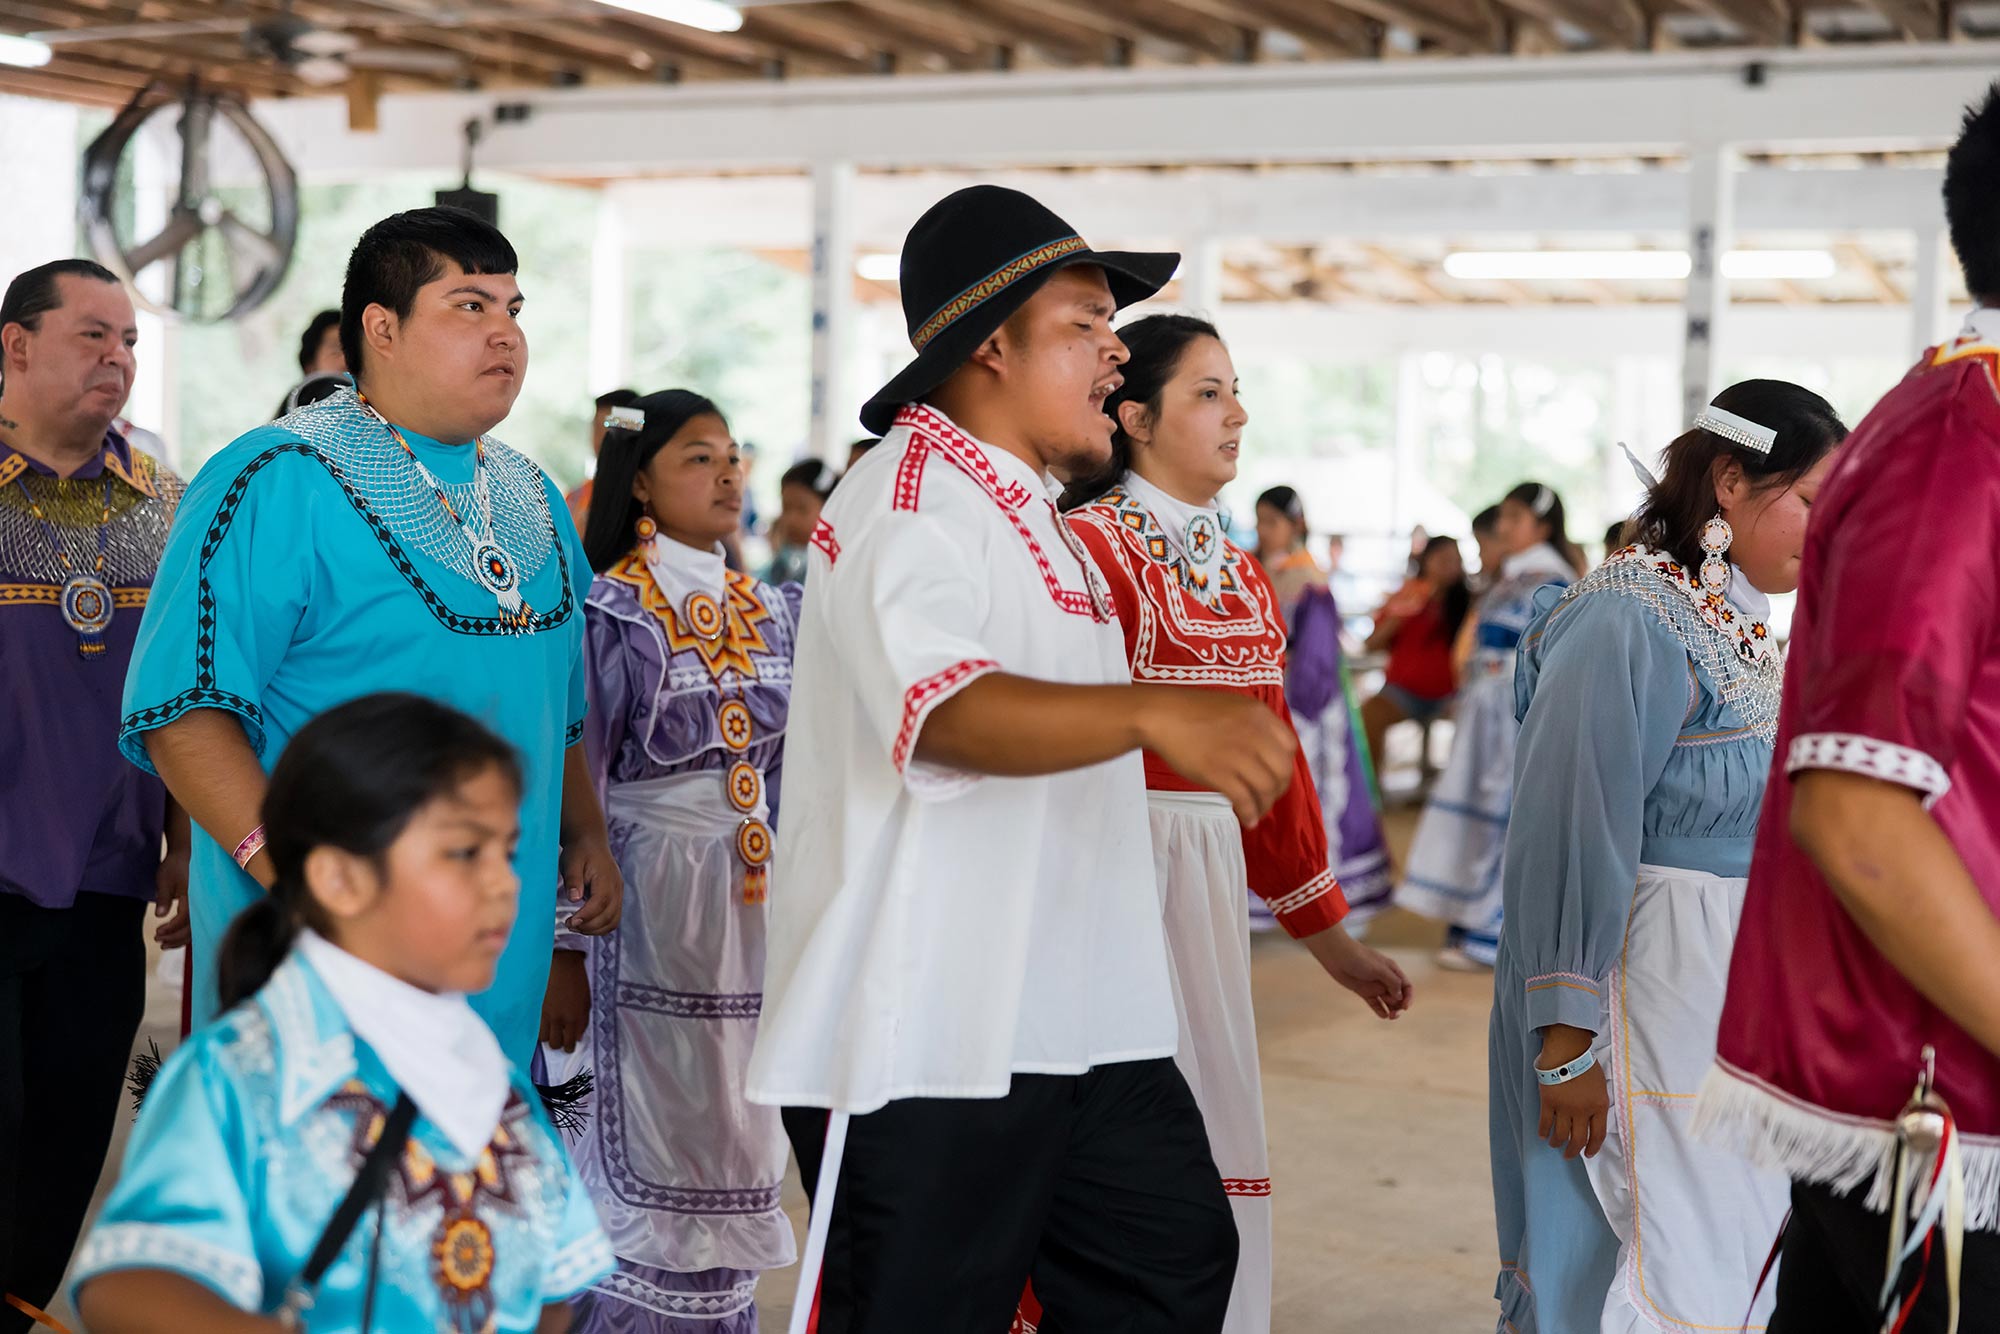 Photo of traditional Choctaw dances performed at the Choctaw Fair